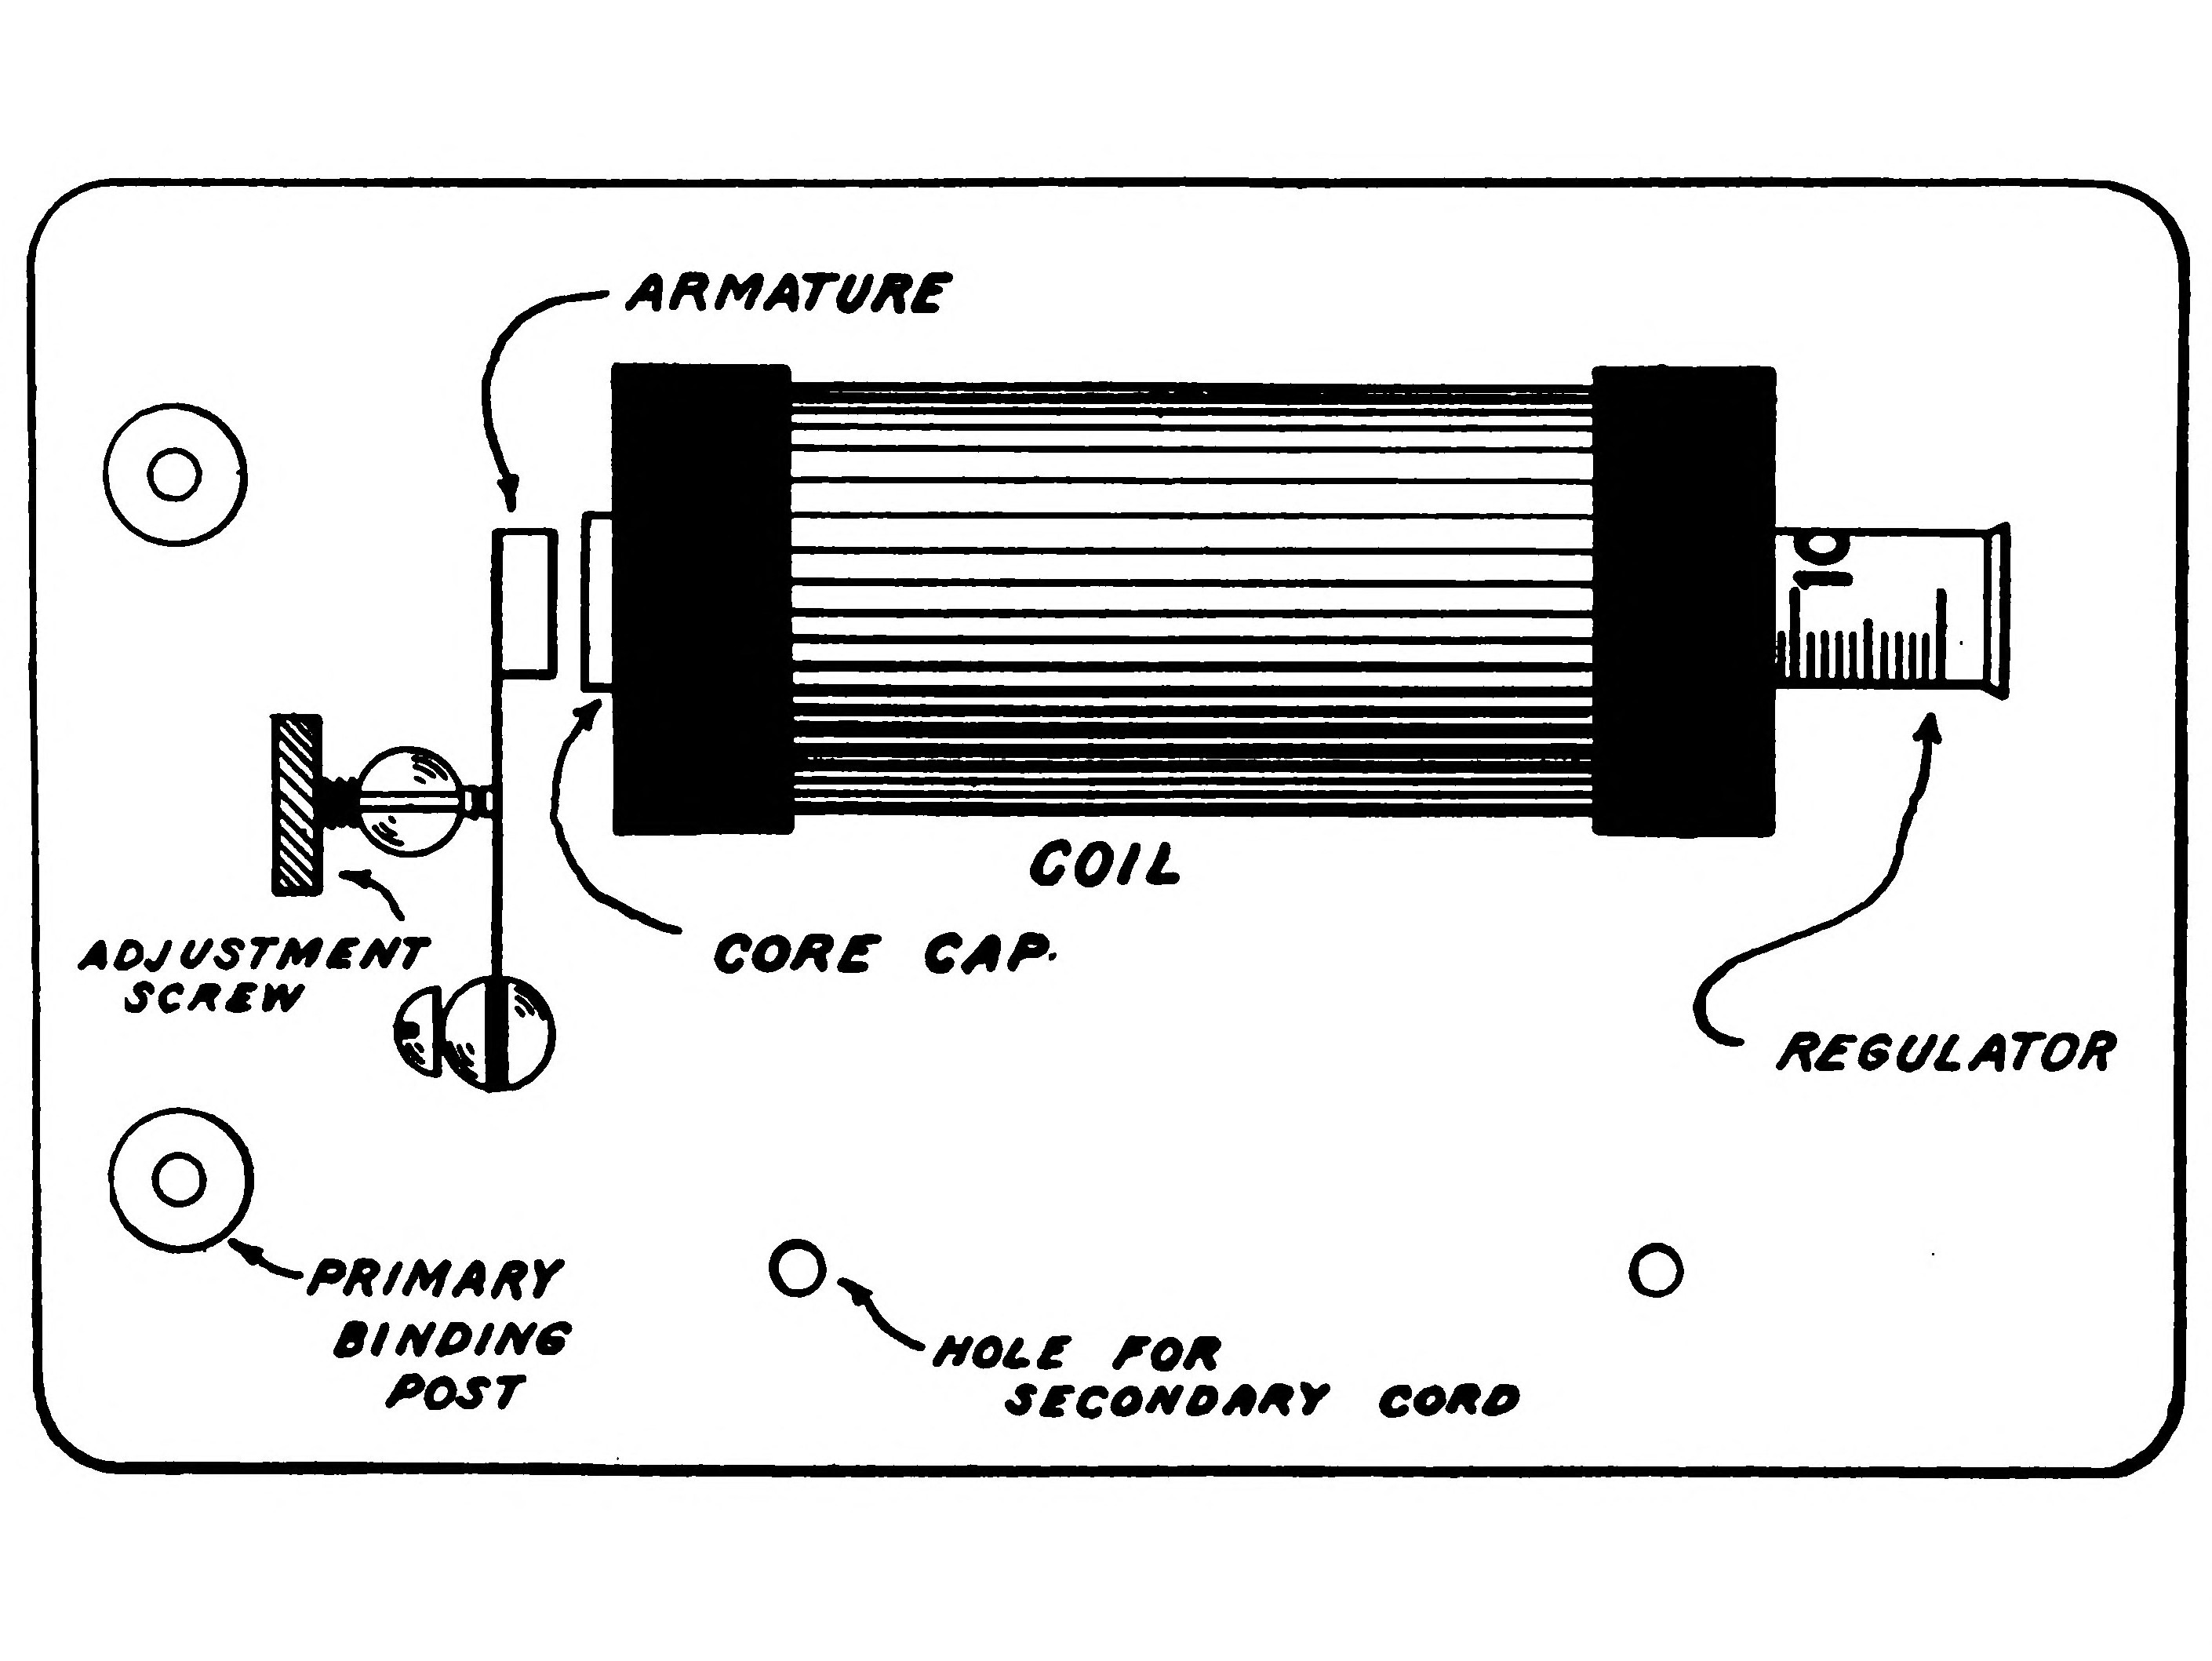 FIG. 104.—Top View of Finished Coil.